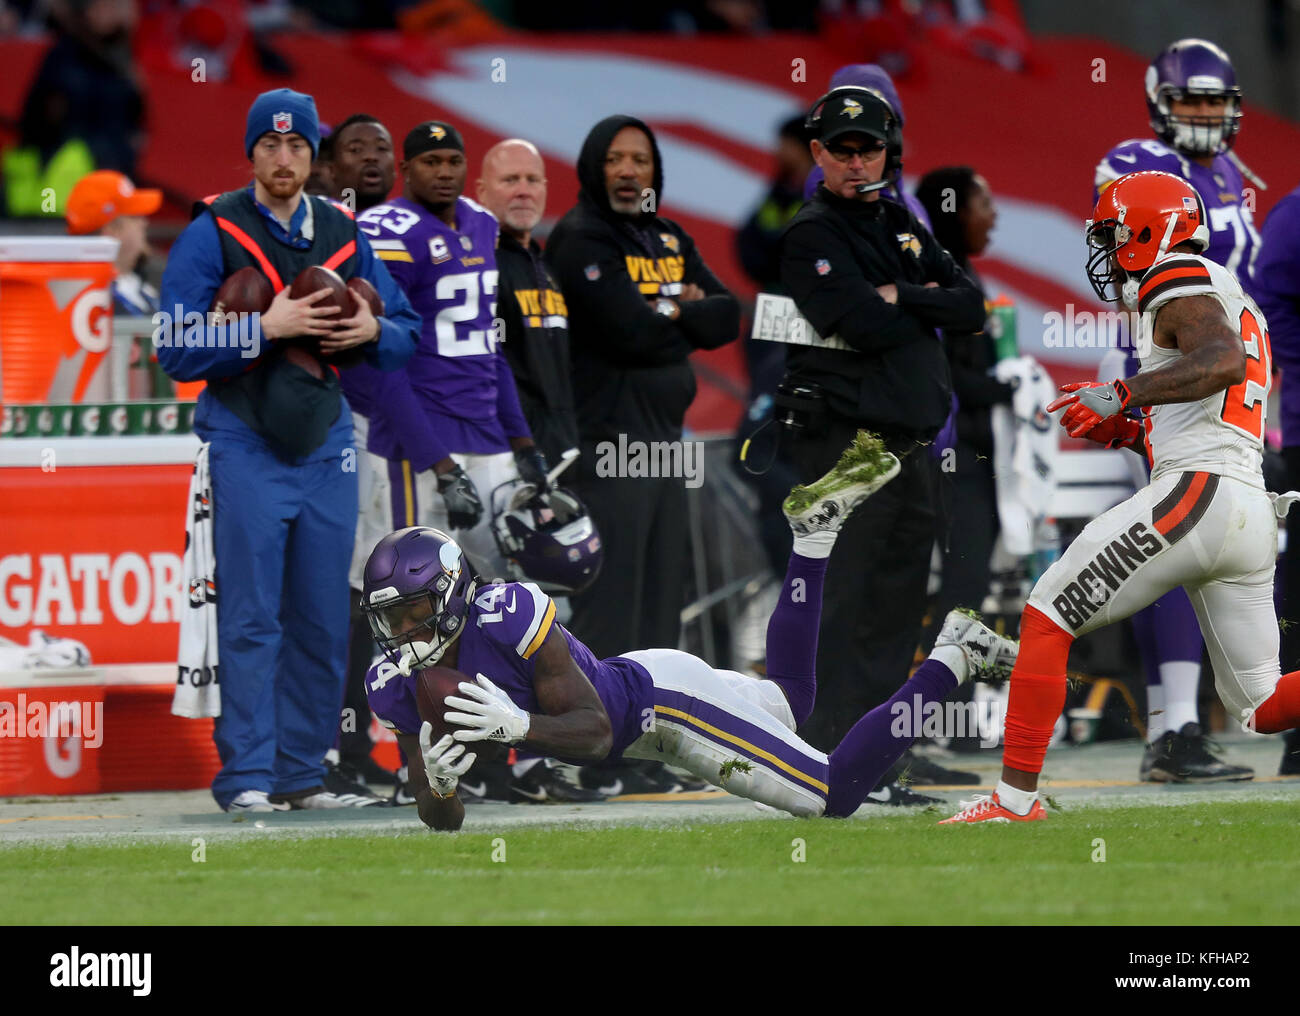 Minnesota Vikings' Stefon Diggs dives to catch the ball during the International Series NFL match at Twickenham, London. Stock Photo